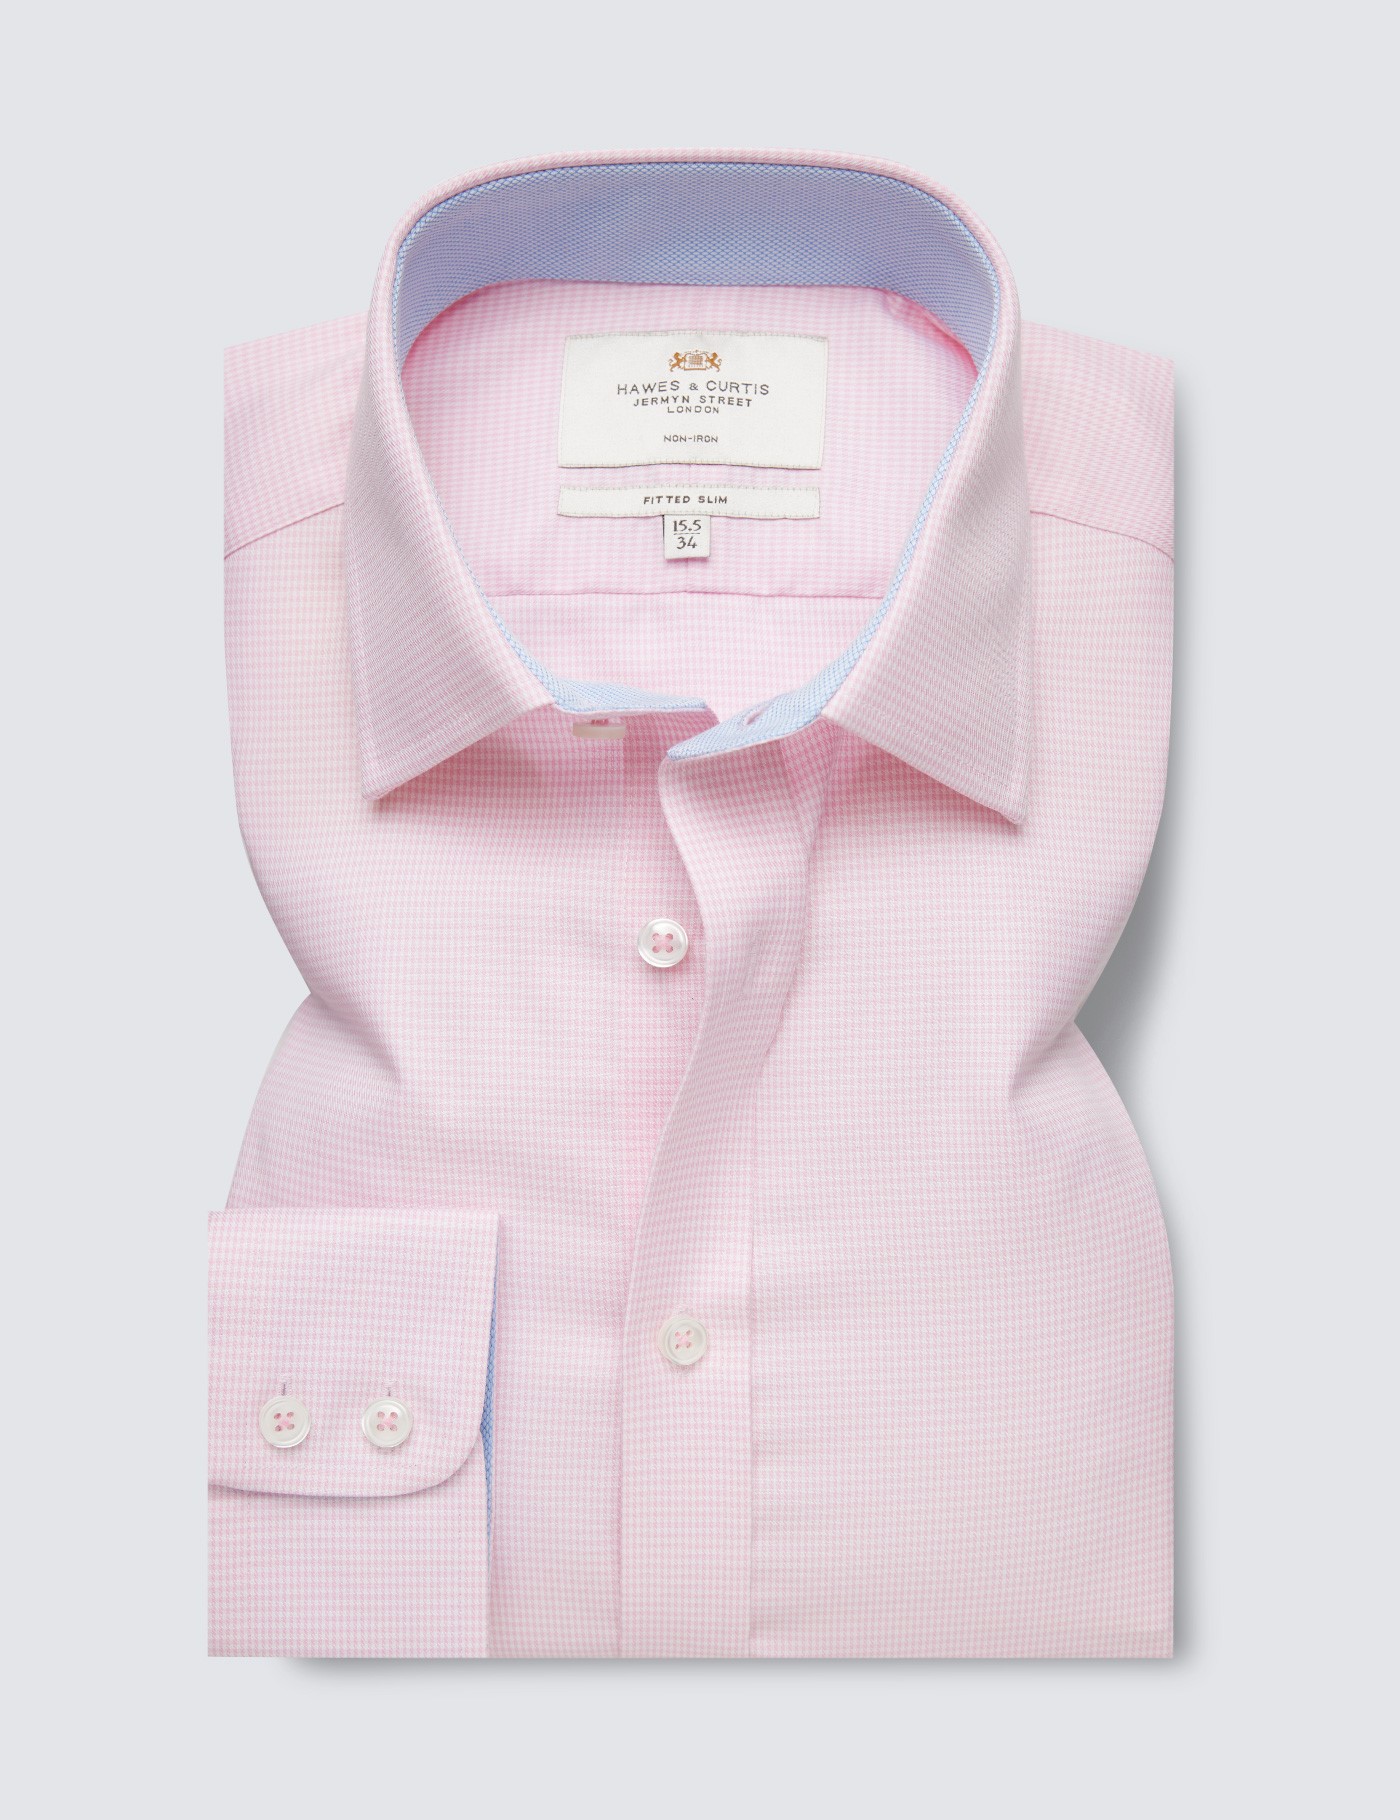 Hawes & Curtis Non Iron Pink & White Fabric Interest Dogstooth Fitted Slim Fit Shirt With Contrast Detail - Single Cuffs